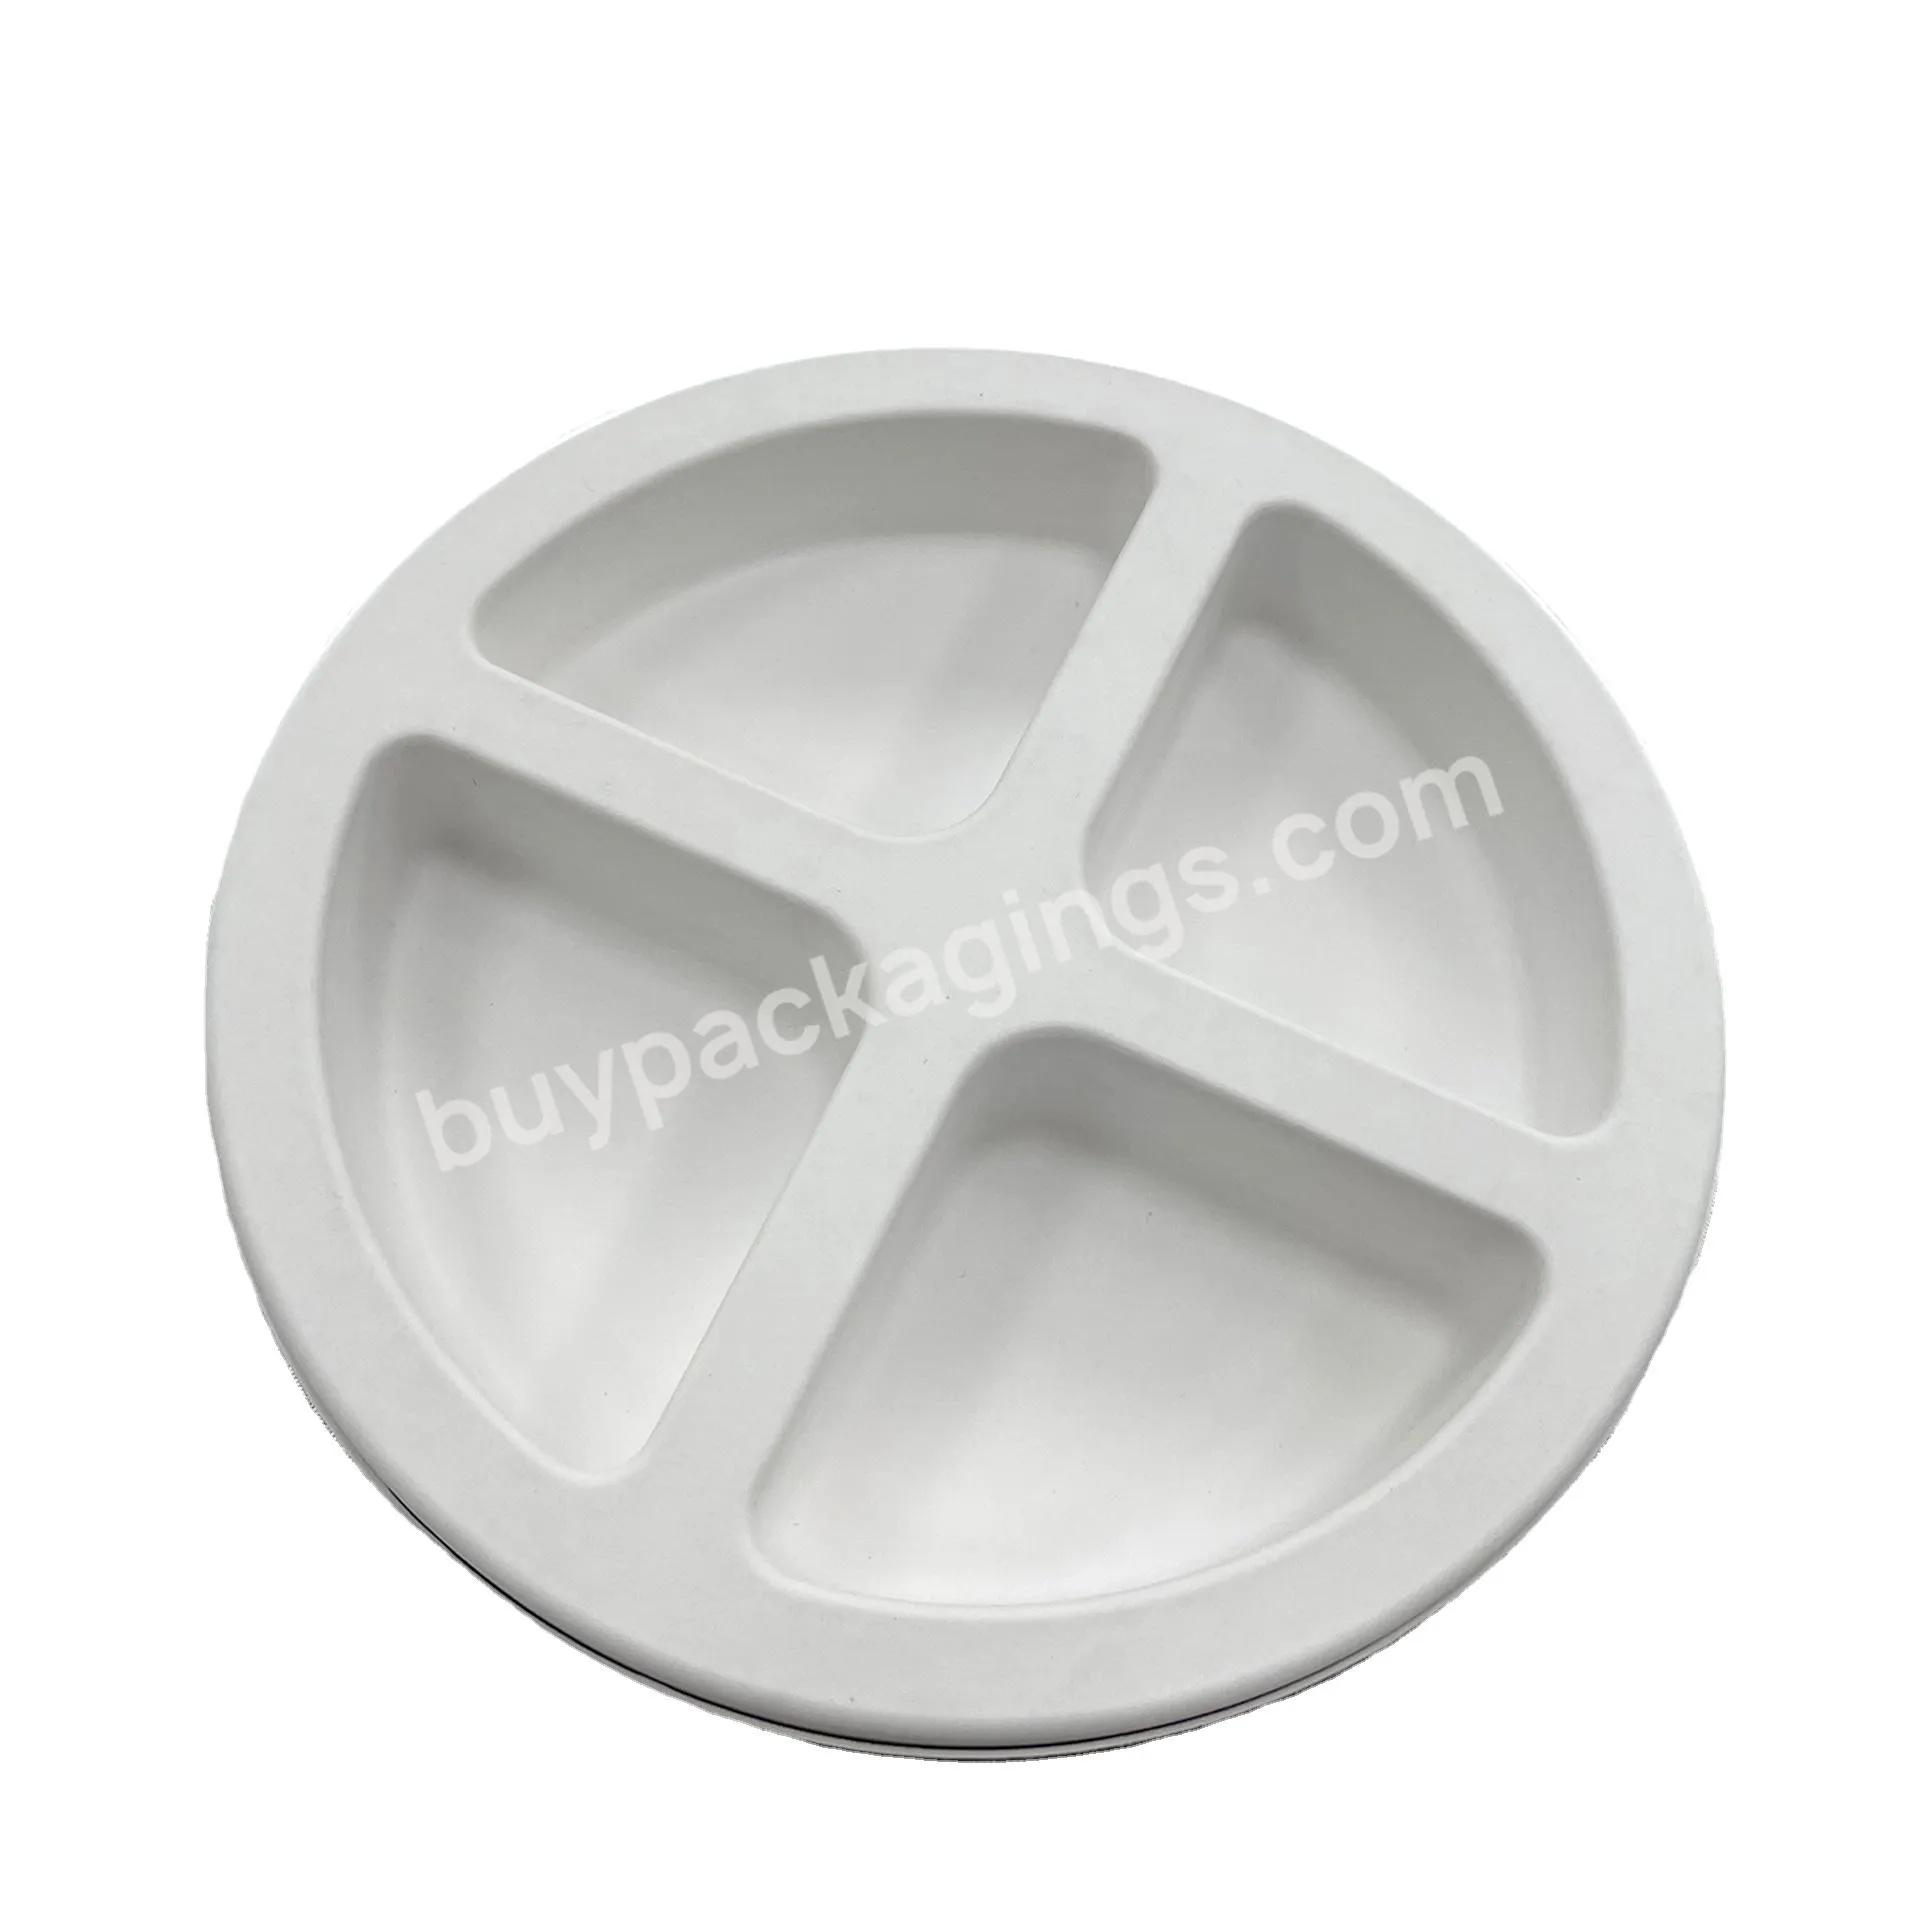 New Wholesale Fashion Disposable Foil Stamping Wet Pressure Cosmetics Bagasse Paper Packaging Round Tray Box - Buy Disposable Round Tray Box,Wet Pressure Cosmetics Box,Paper Packaging Box.